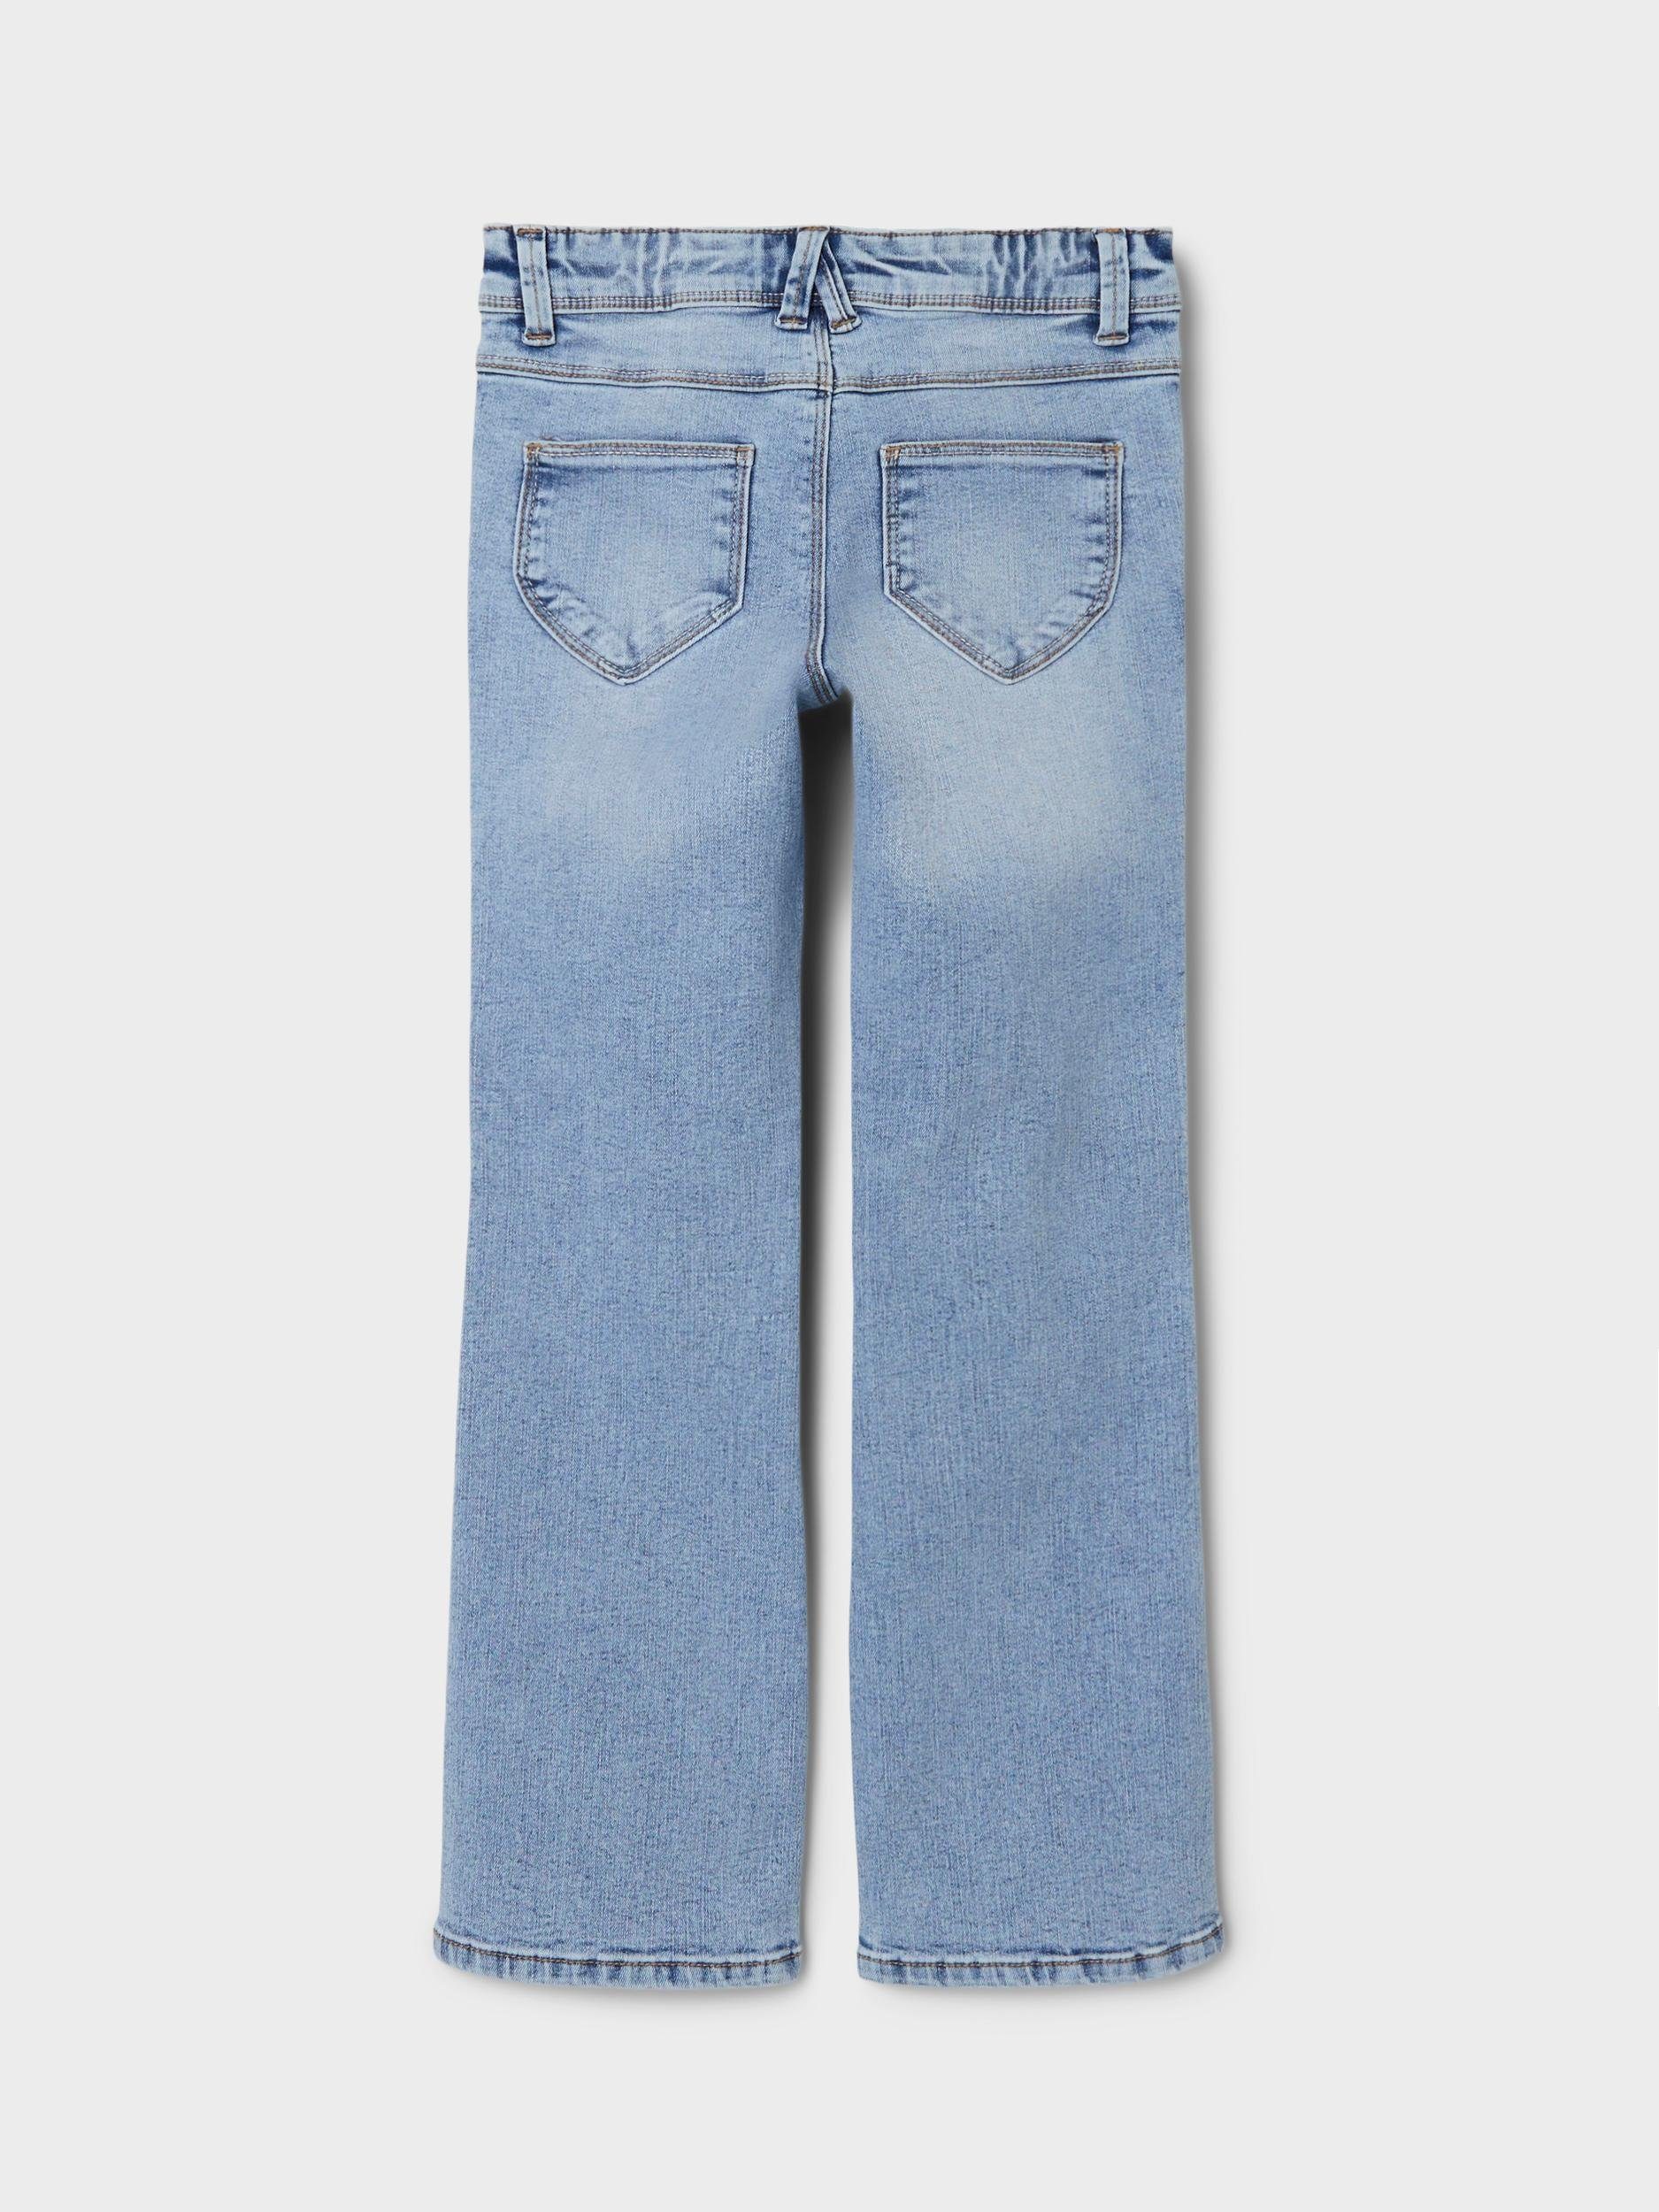 mit It Bootcut-Jeans Denim SKINNY Stretch 1142-AU JEANS NOOS Light BOOT NKFPOLLY Blue Name